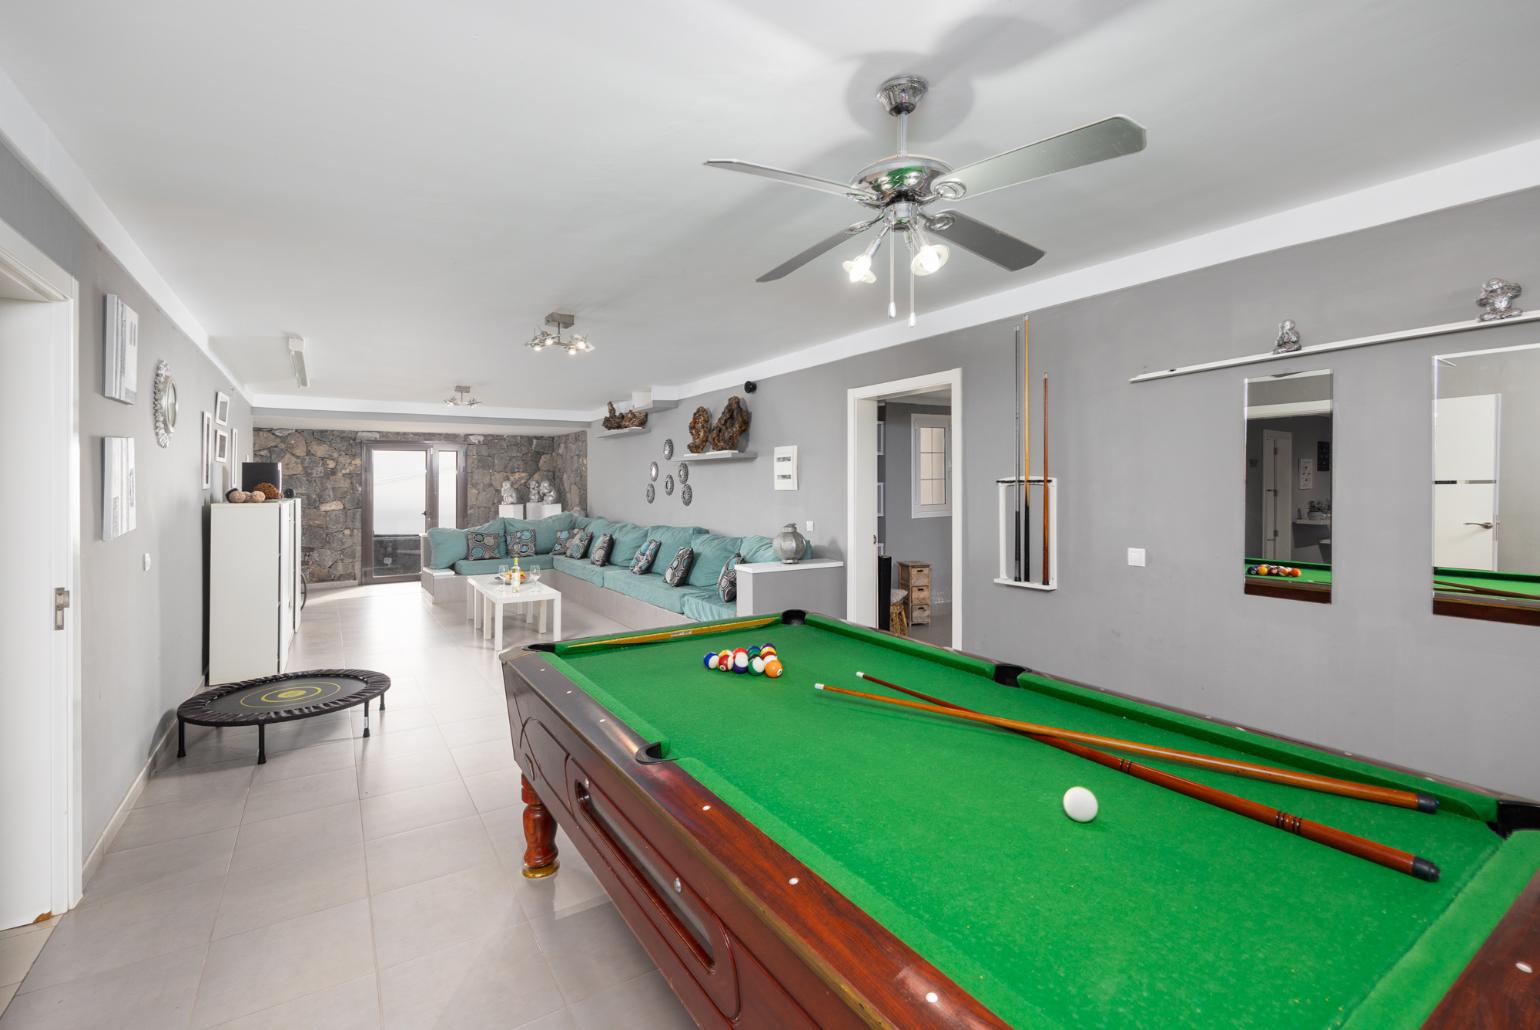 Living room with sofa, TV, and pool table